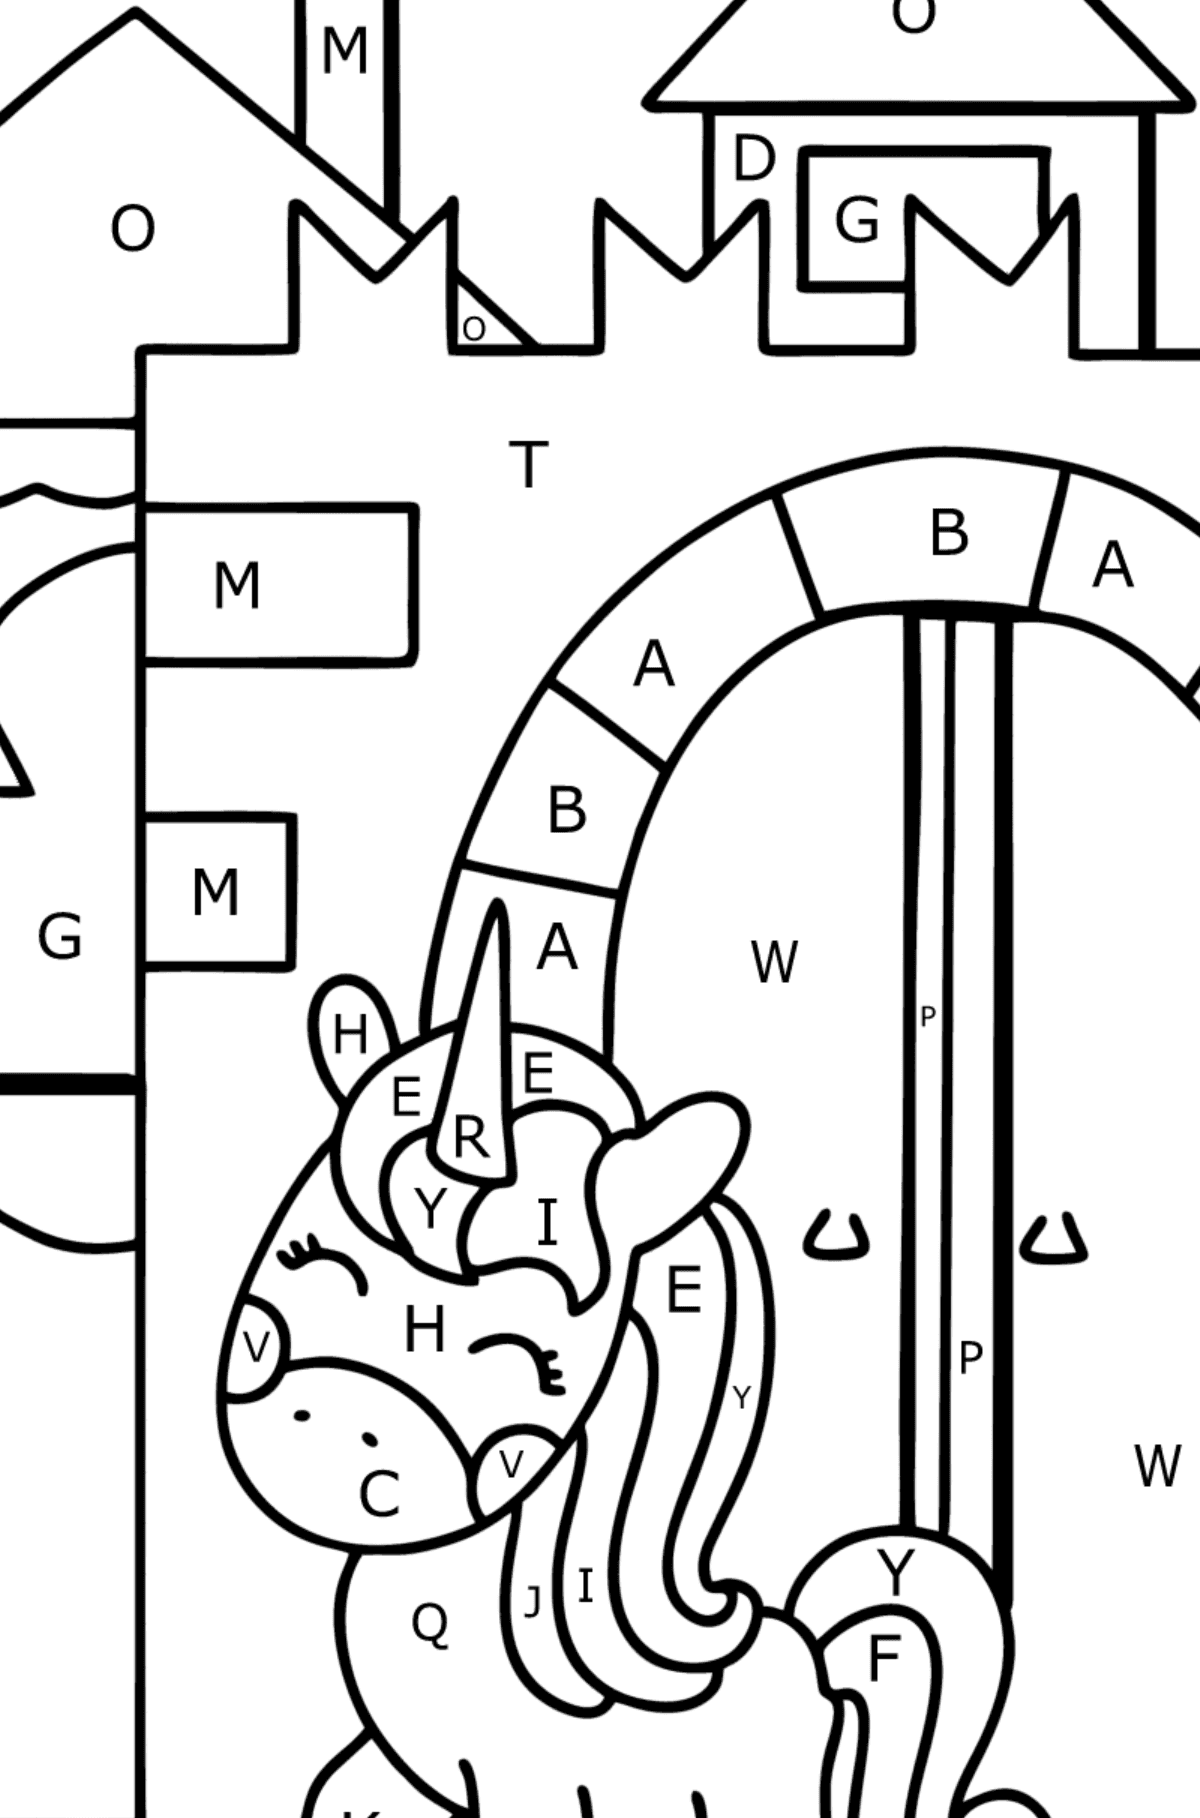 Dreamland coloring page - Coloring by Letters for Kids